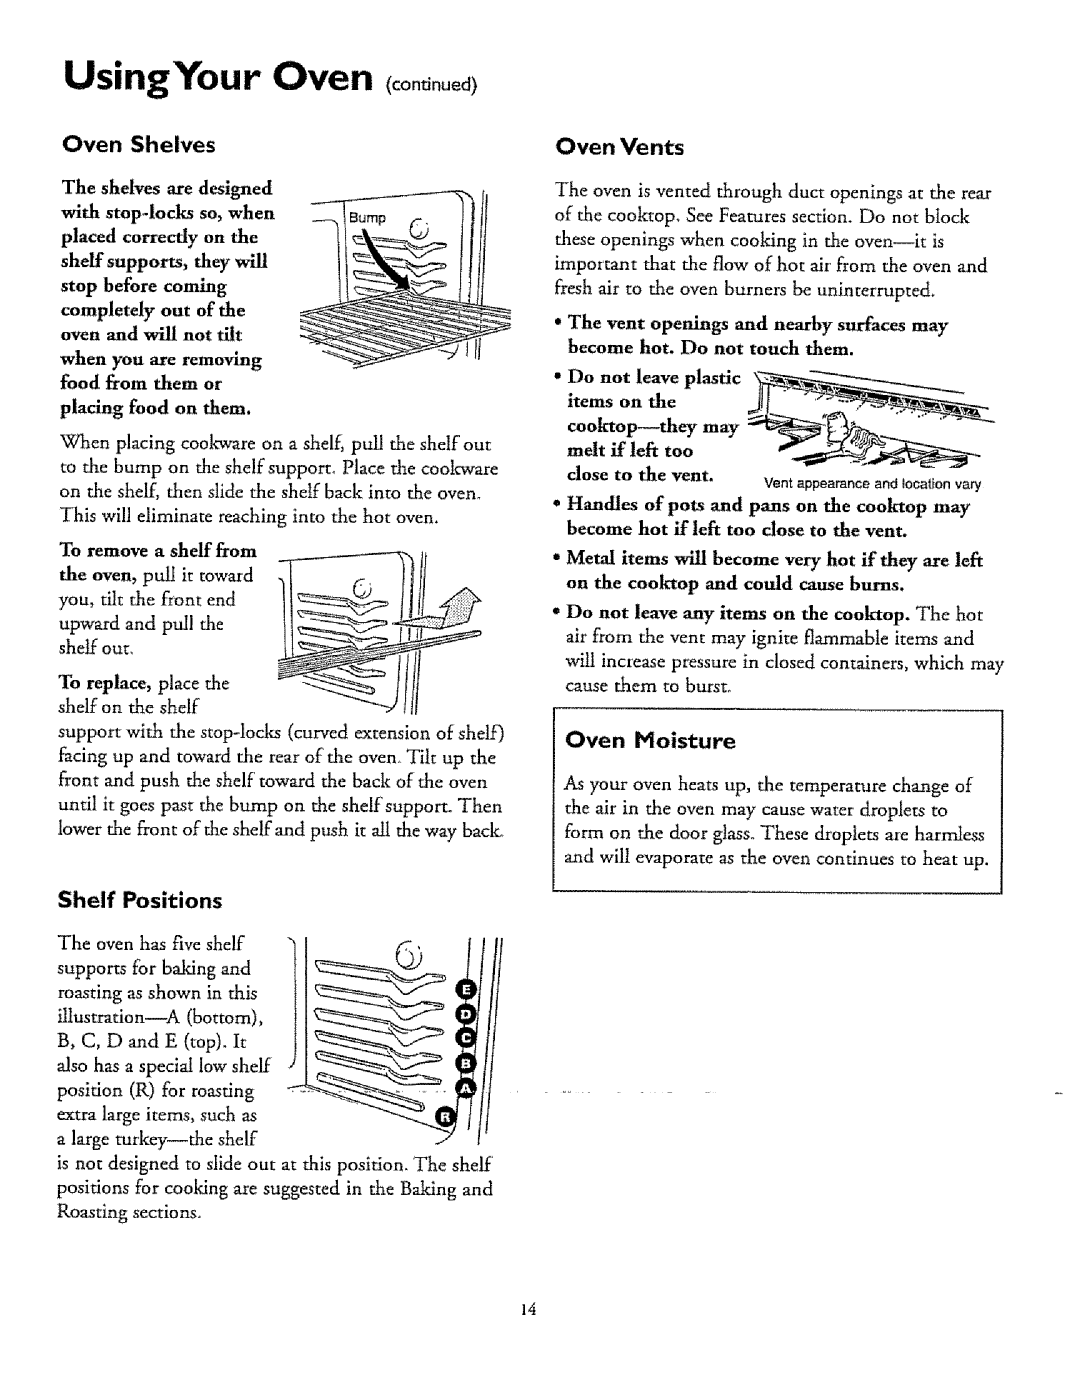 Sears 61018, 71751, 71068 Using Your Oven ooo oood, Oven Shelves, Shelf Positions, The shelves are designed, Oven Vents 